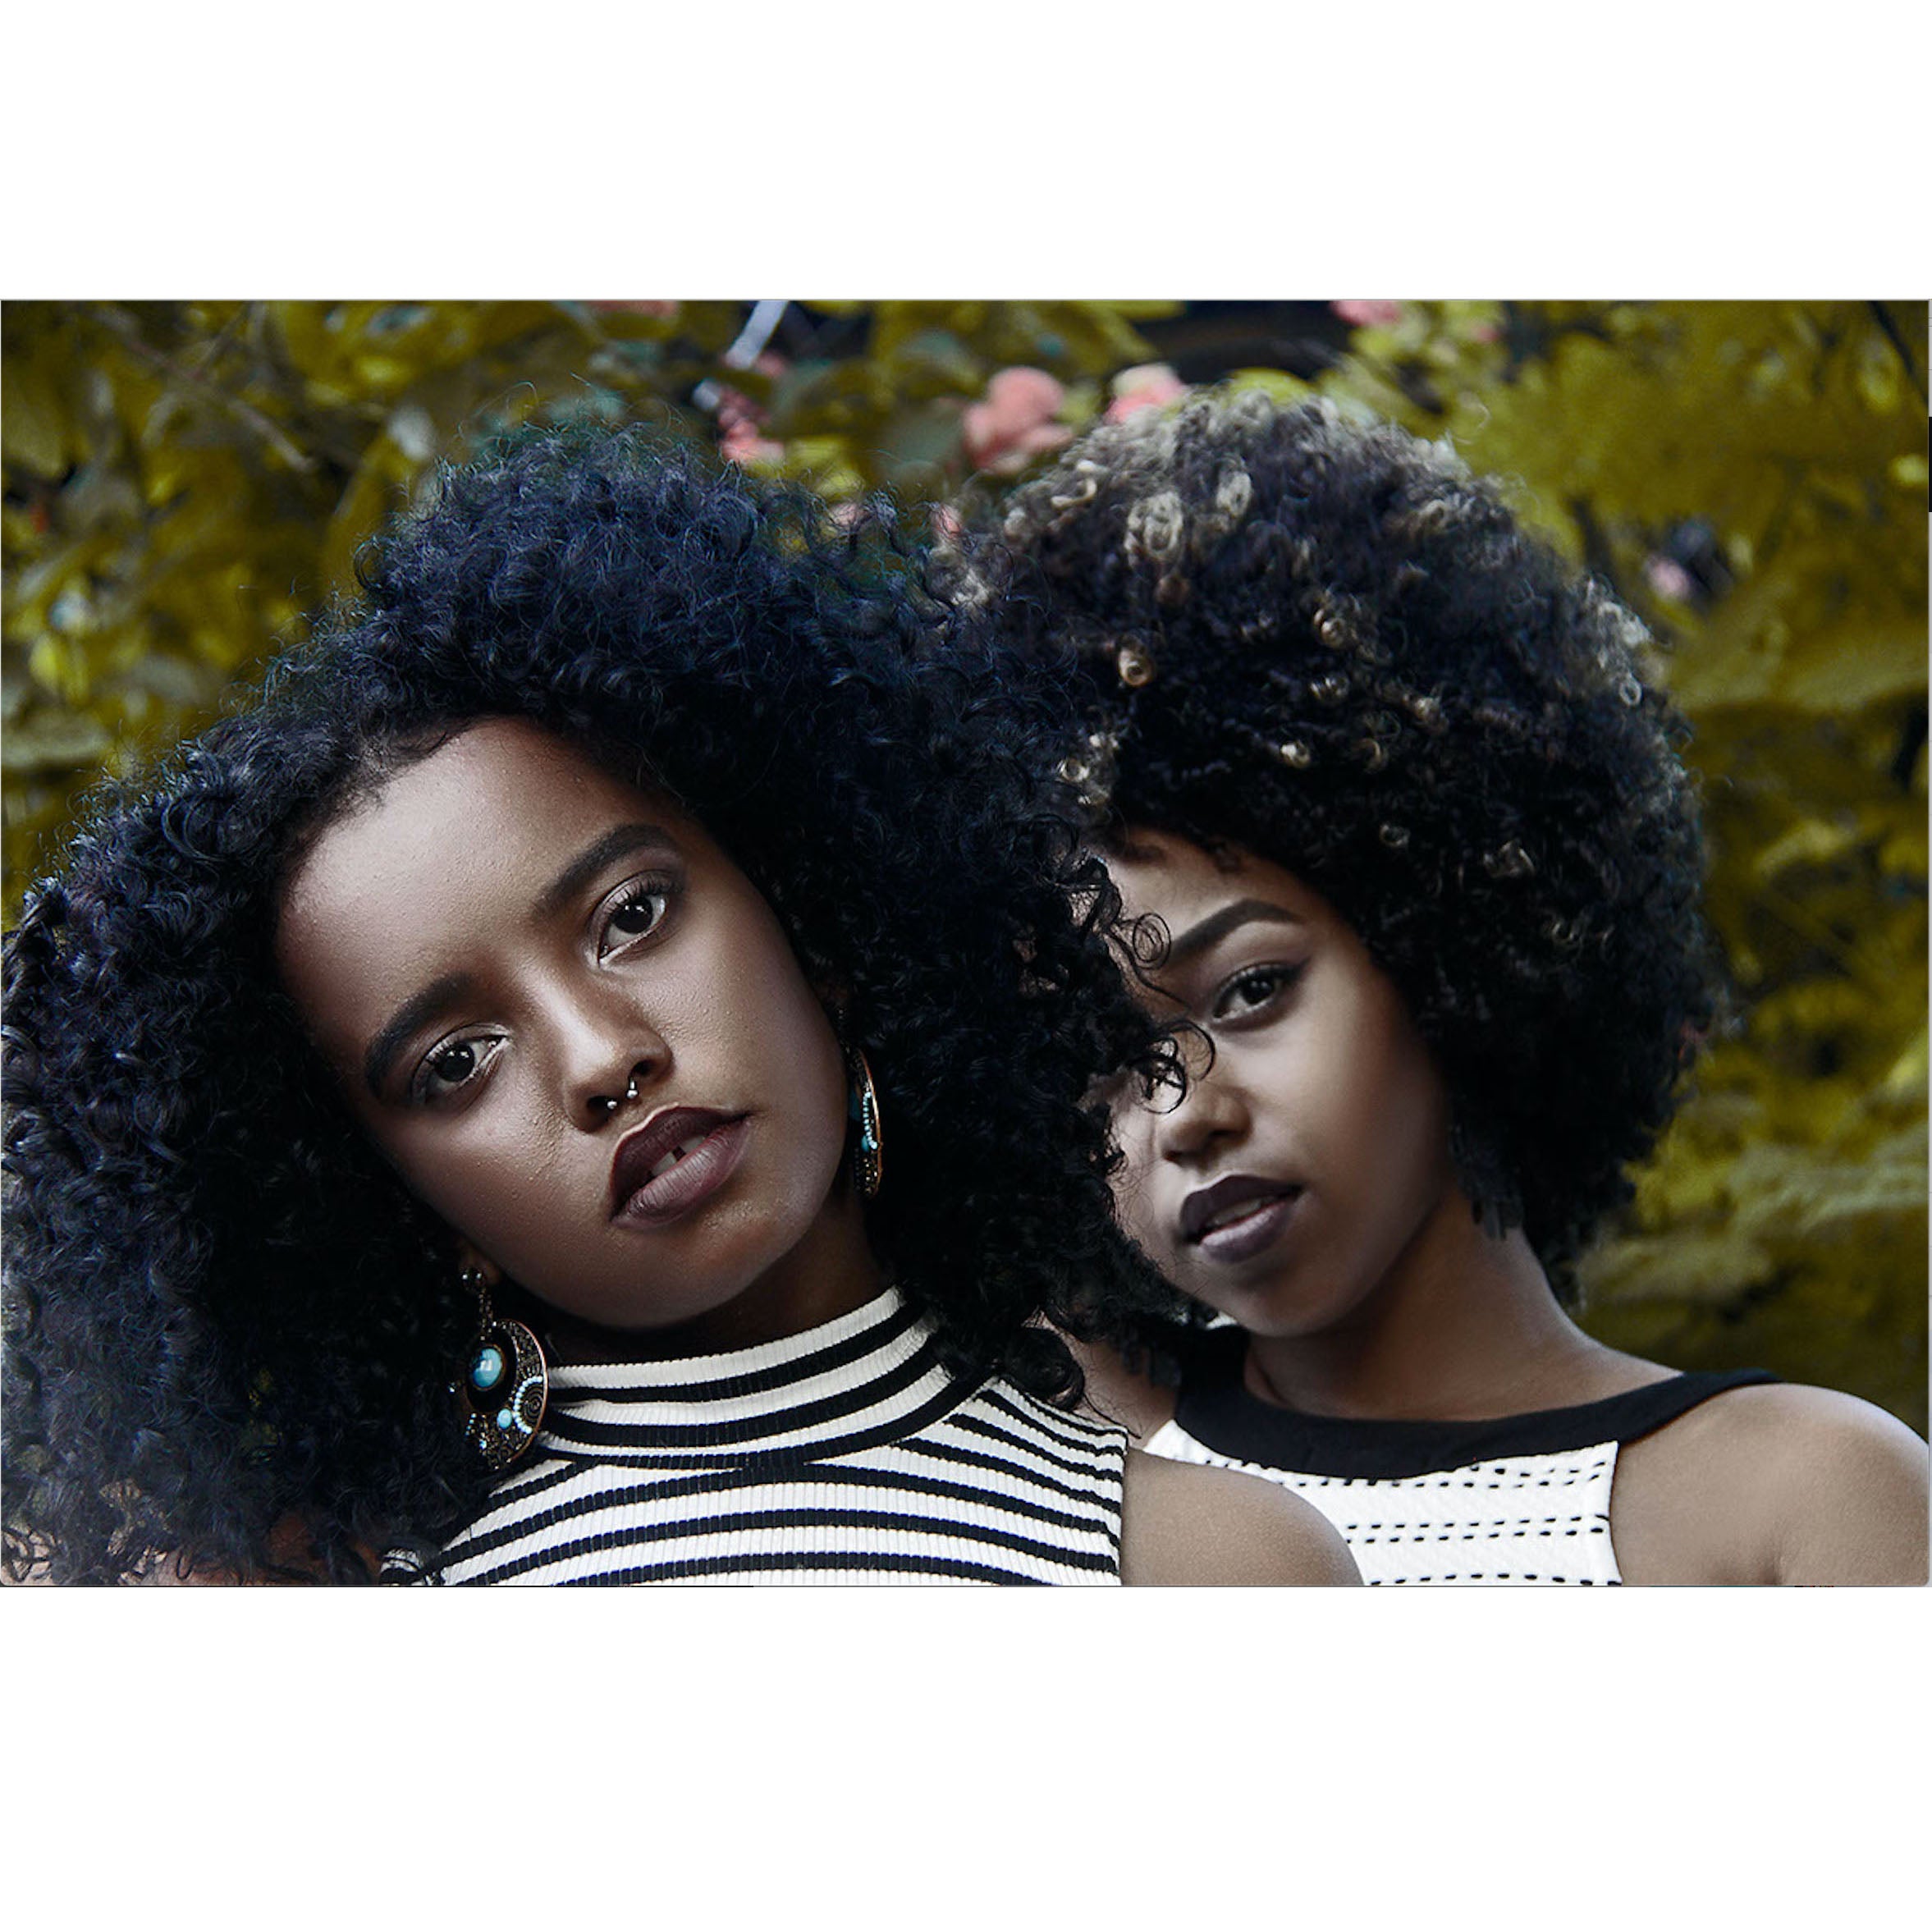 These Images of Afro-Brazilian Black Women Will Take Your Breath Away